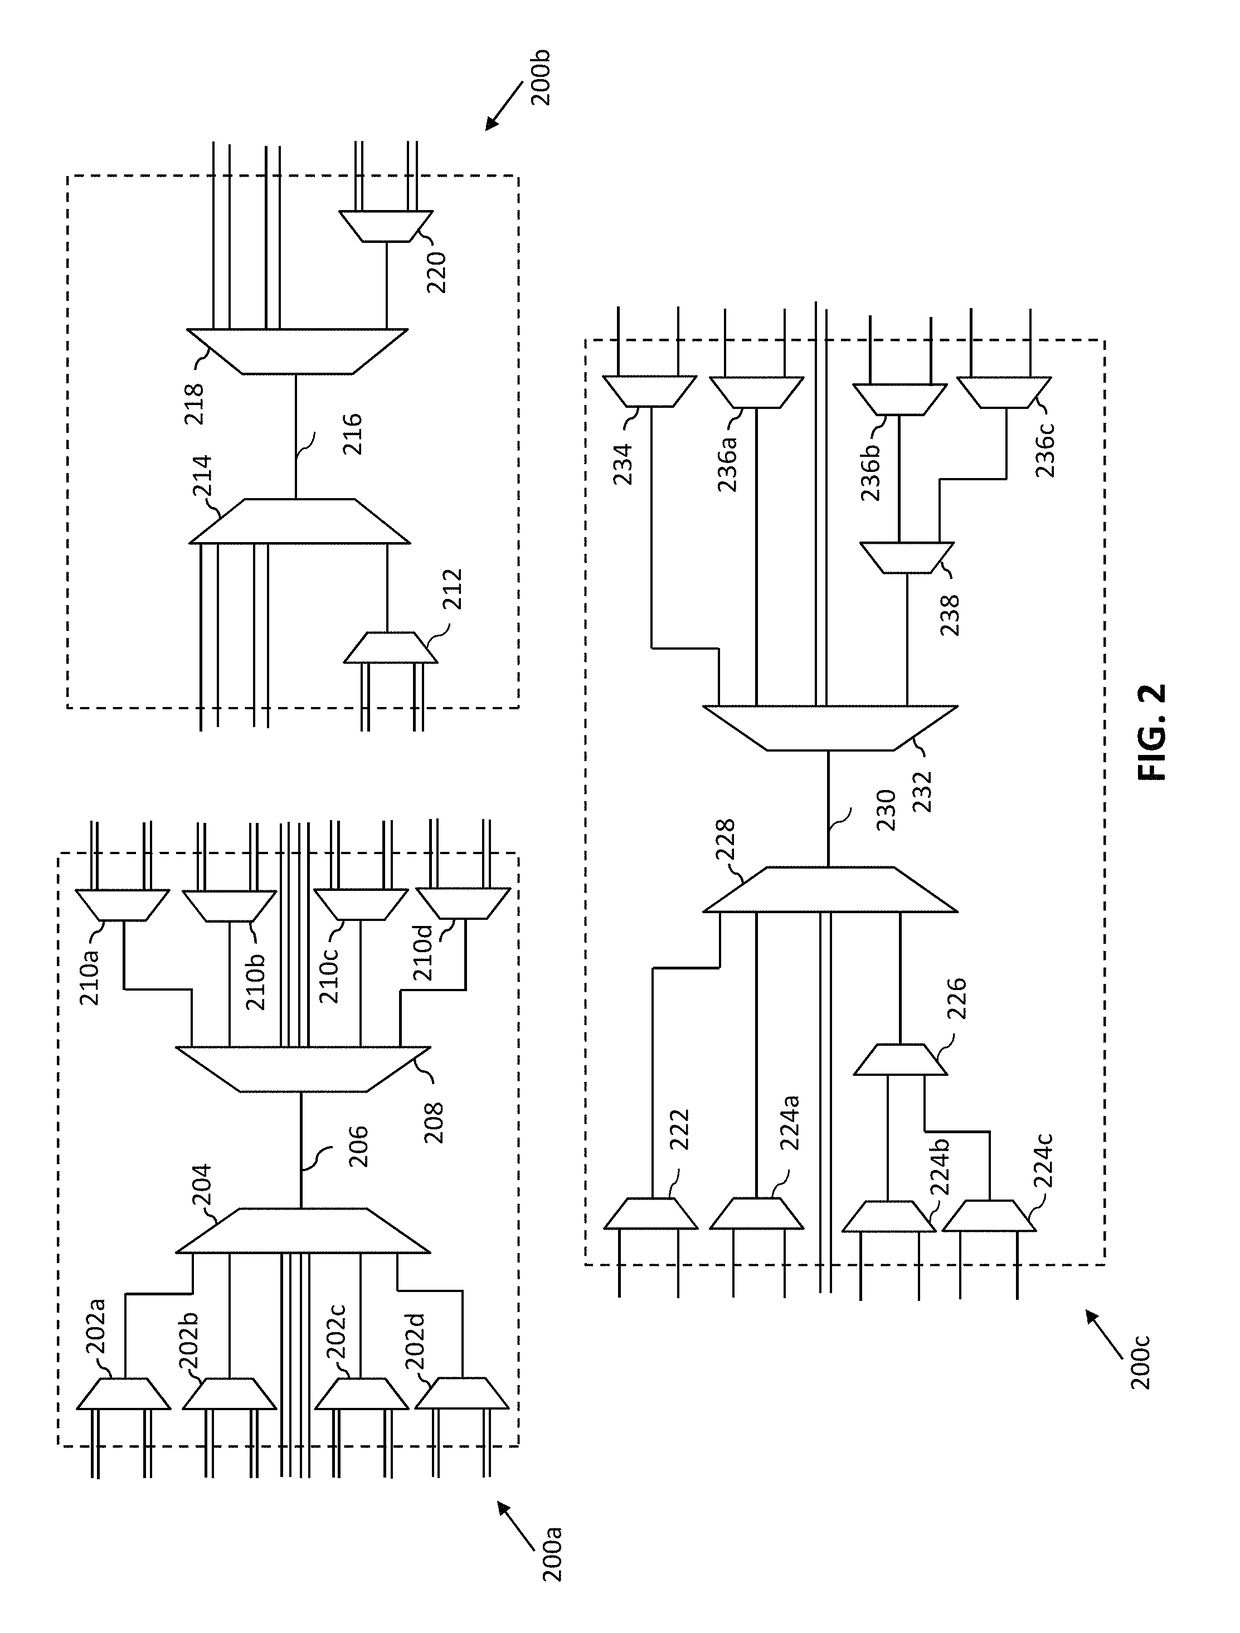 Compound semiconductor photonic integrated circuit with dielectric waveguide